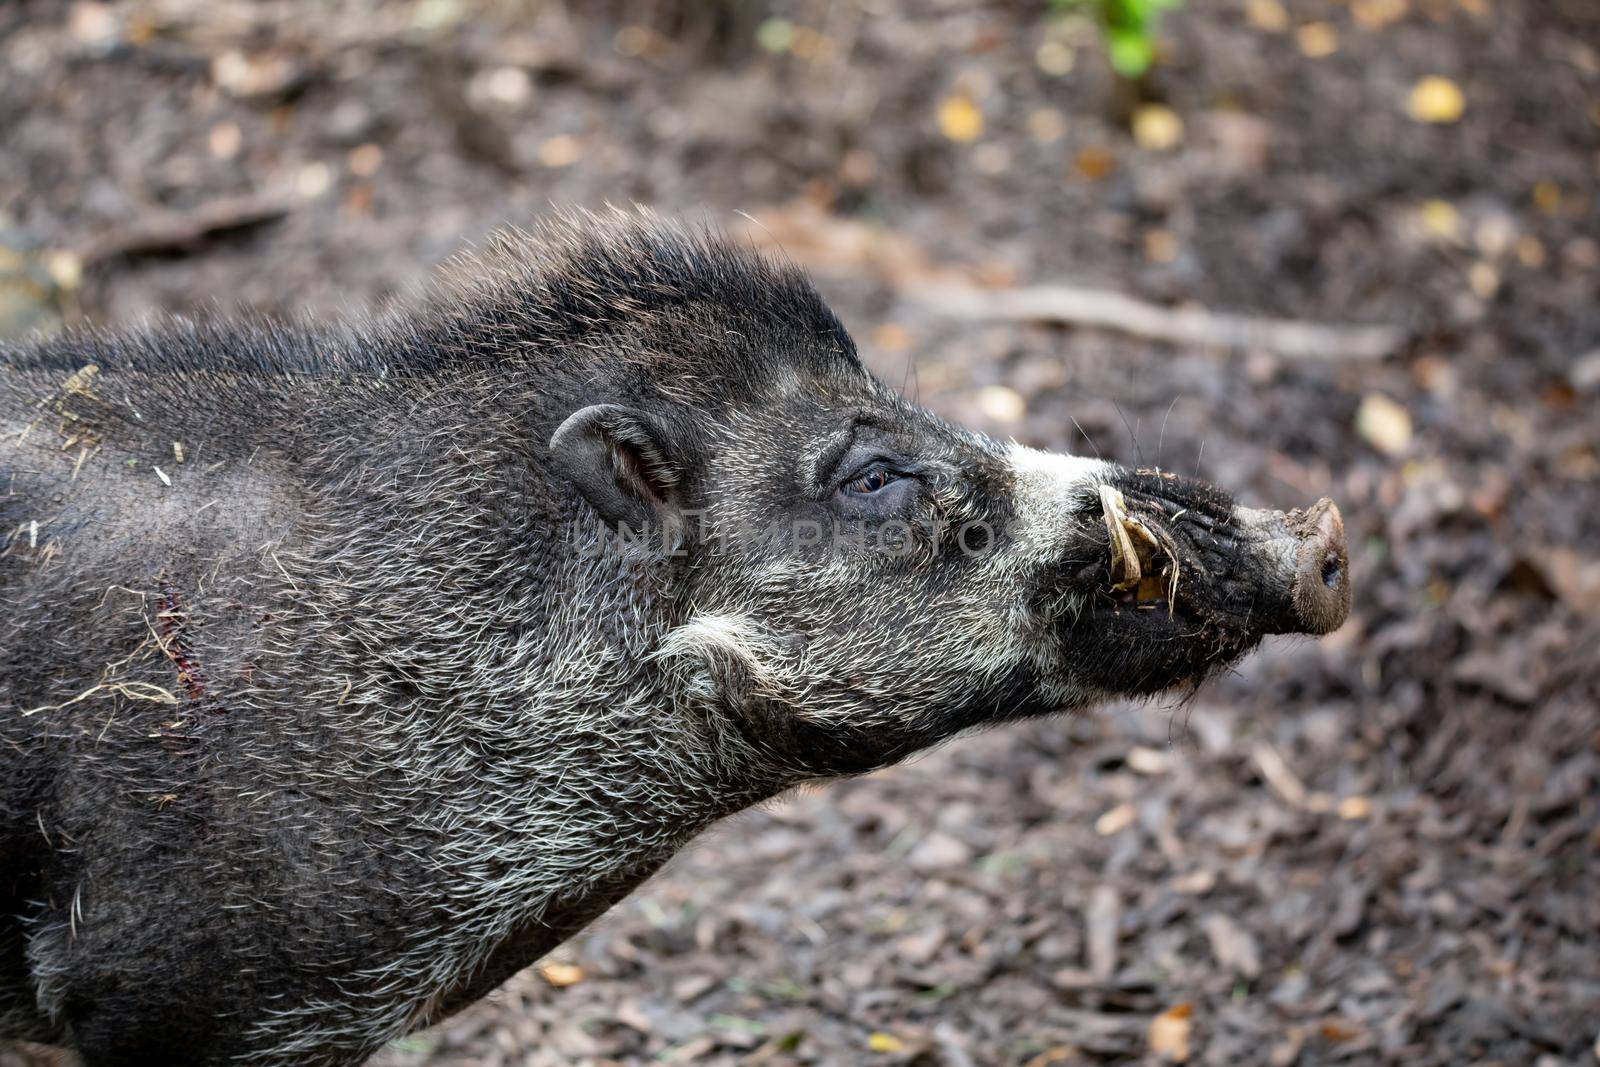 Big adult boar of Visayan warty pig (Sus cebifrons) is a critically endangered species in the pig genus. It is endemic to Visayan Islands in the central Philippines